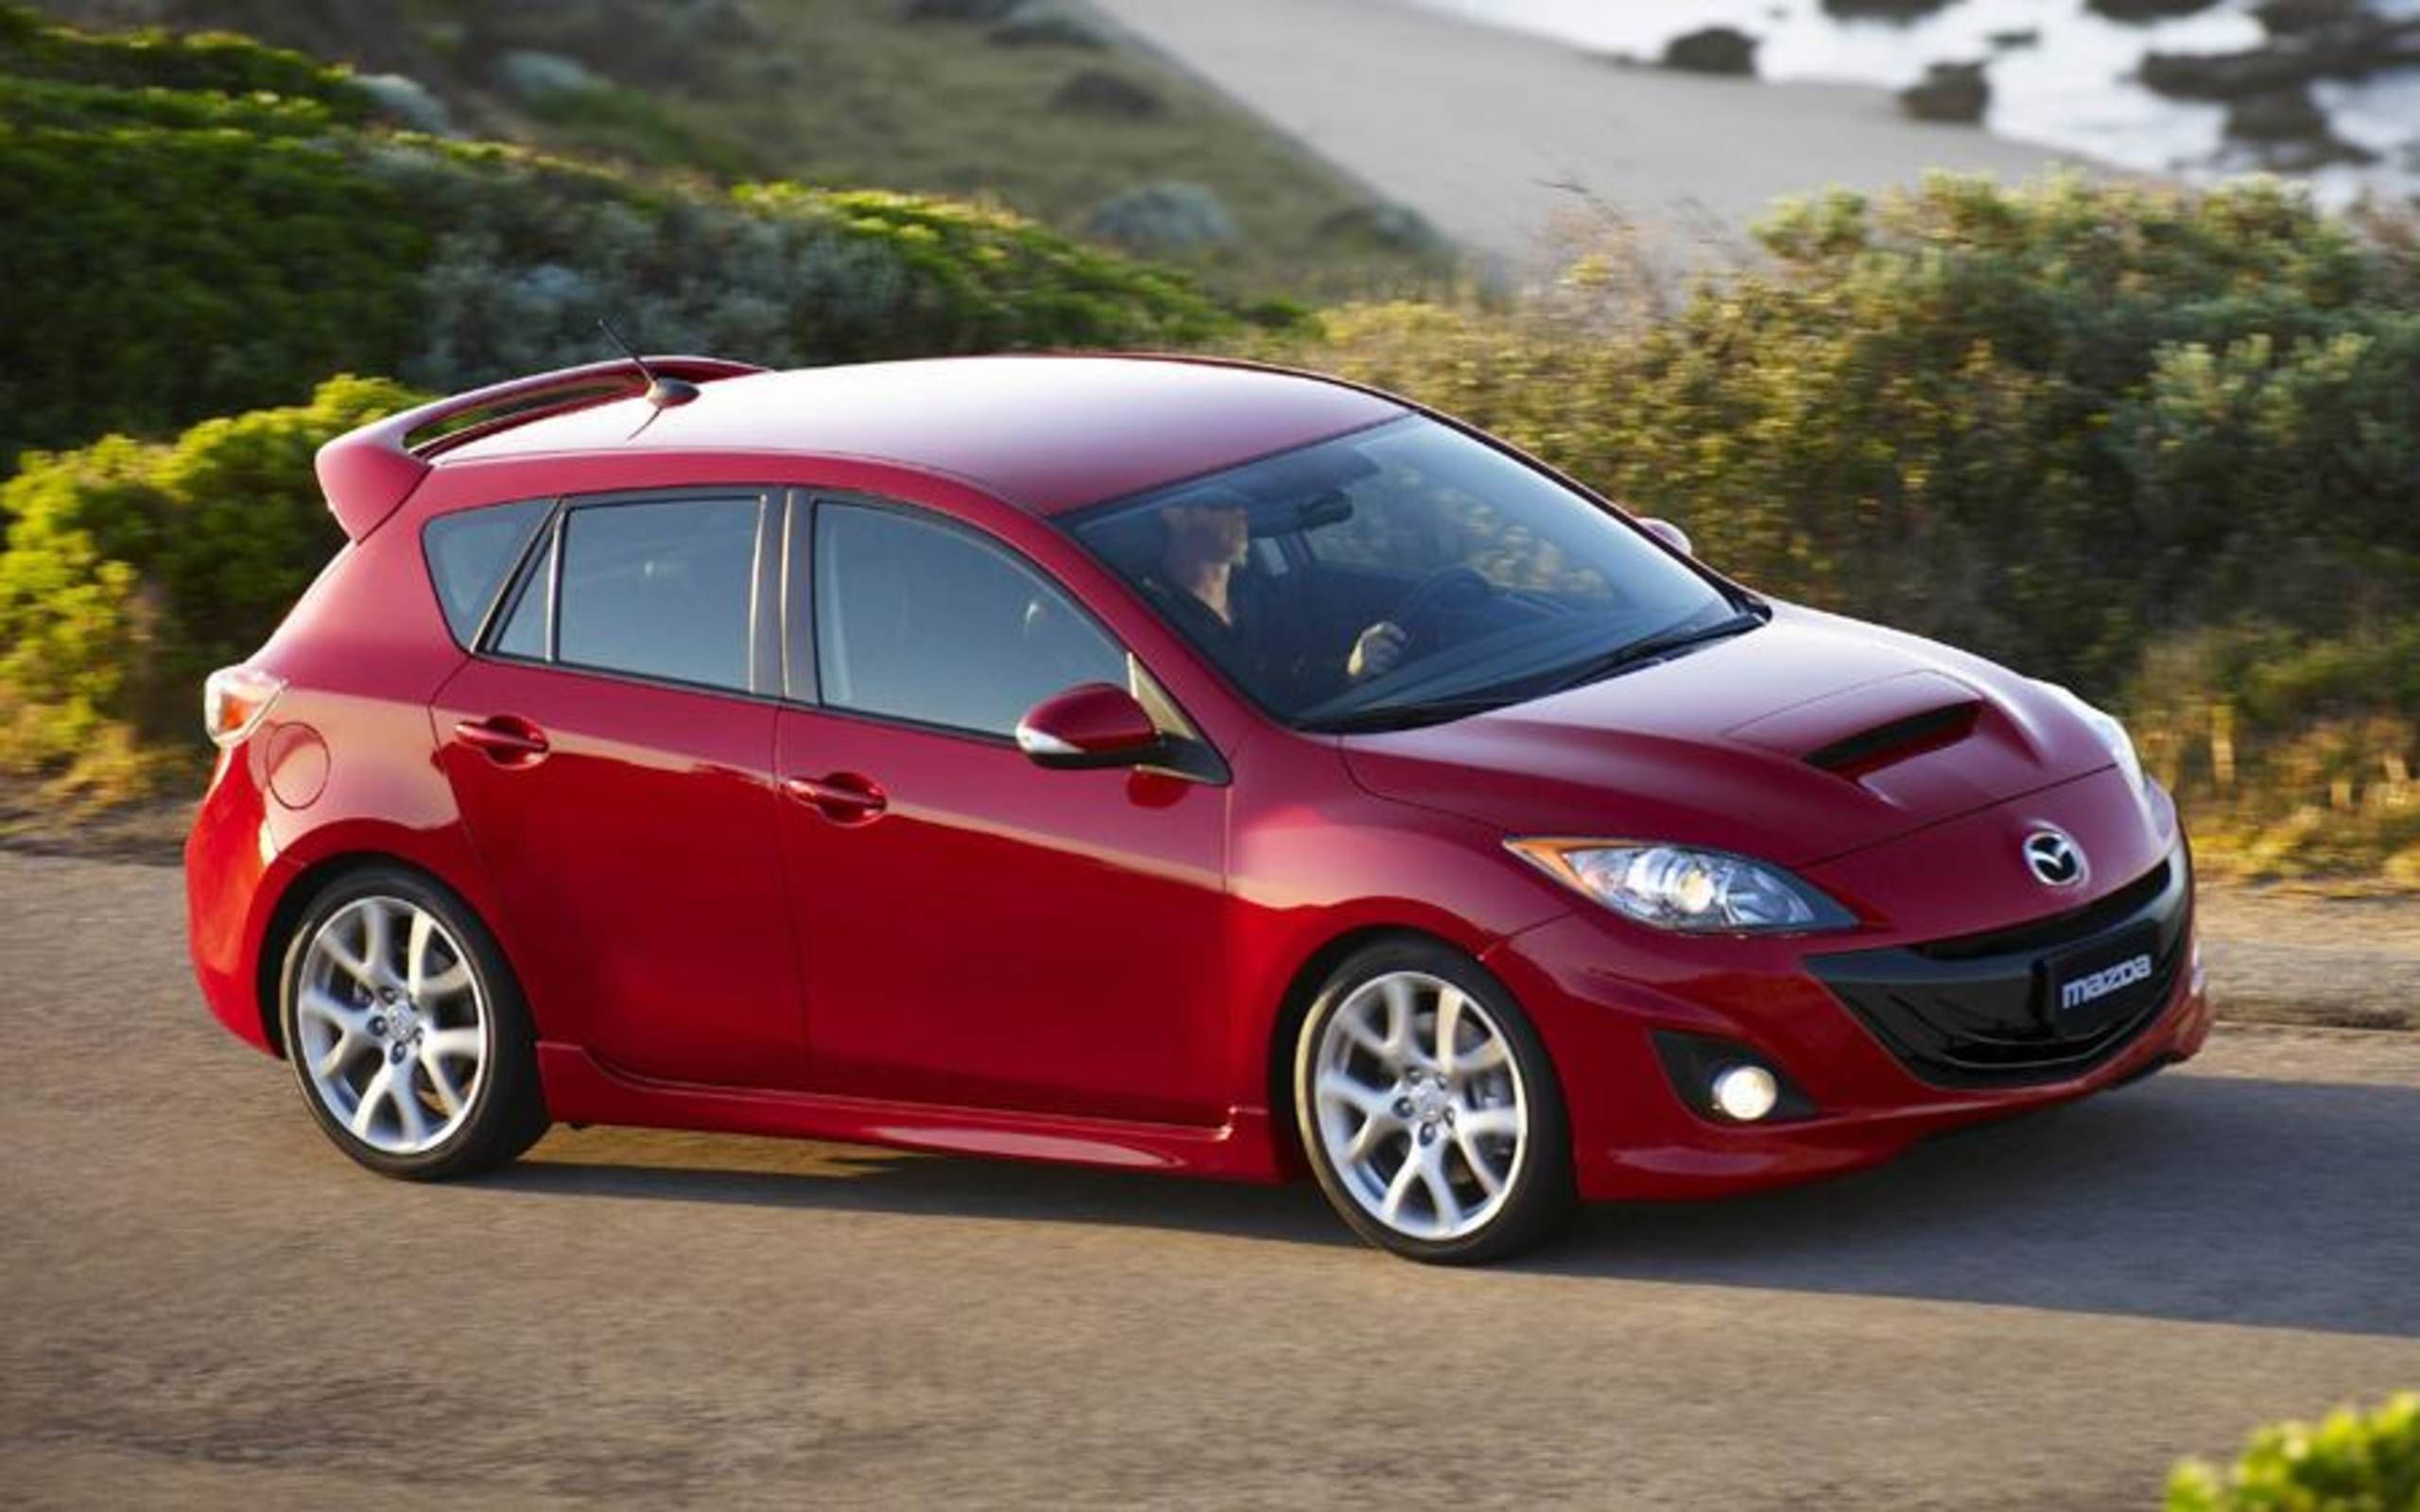 2012 Mazda Mazdaspeed 3 Touring review notes: Still packing a big  performance punch